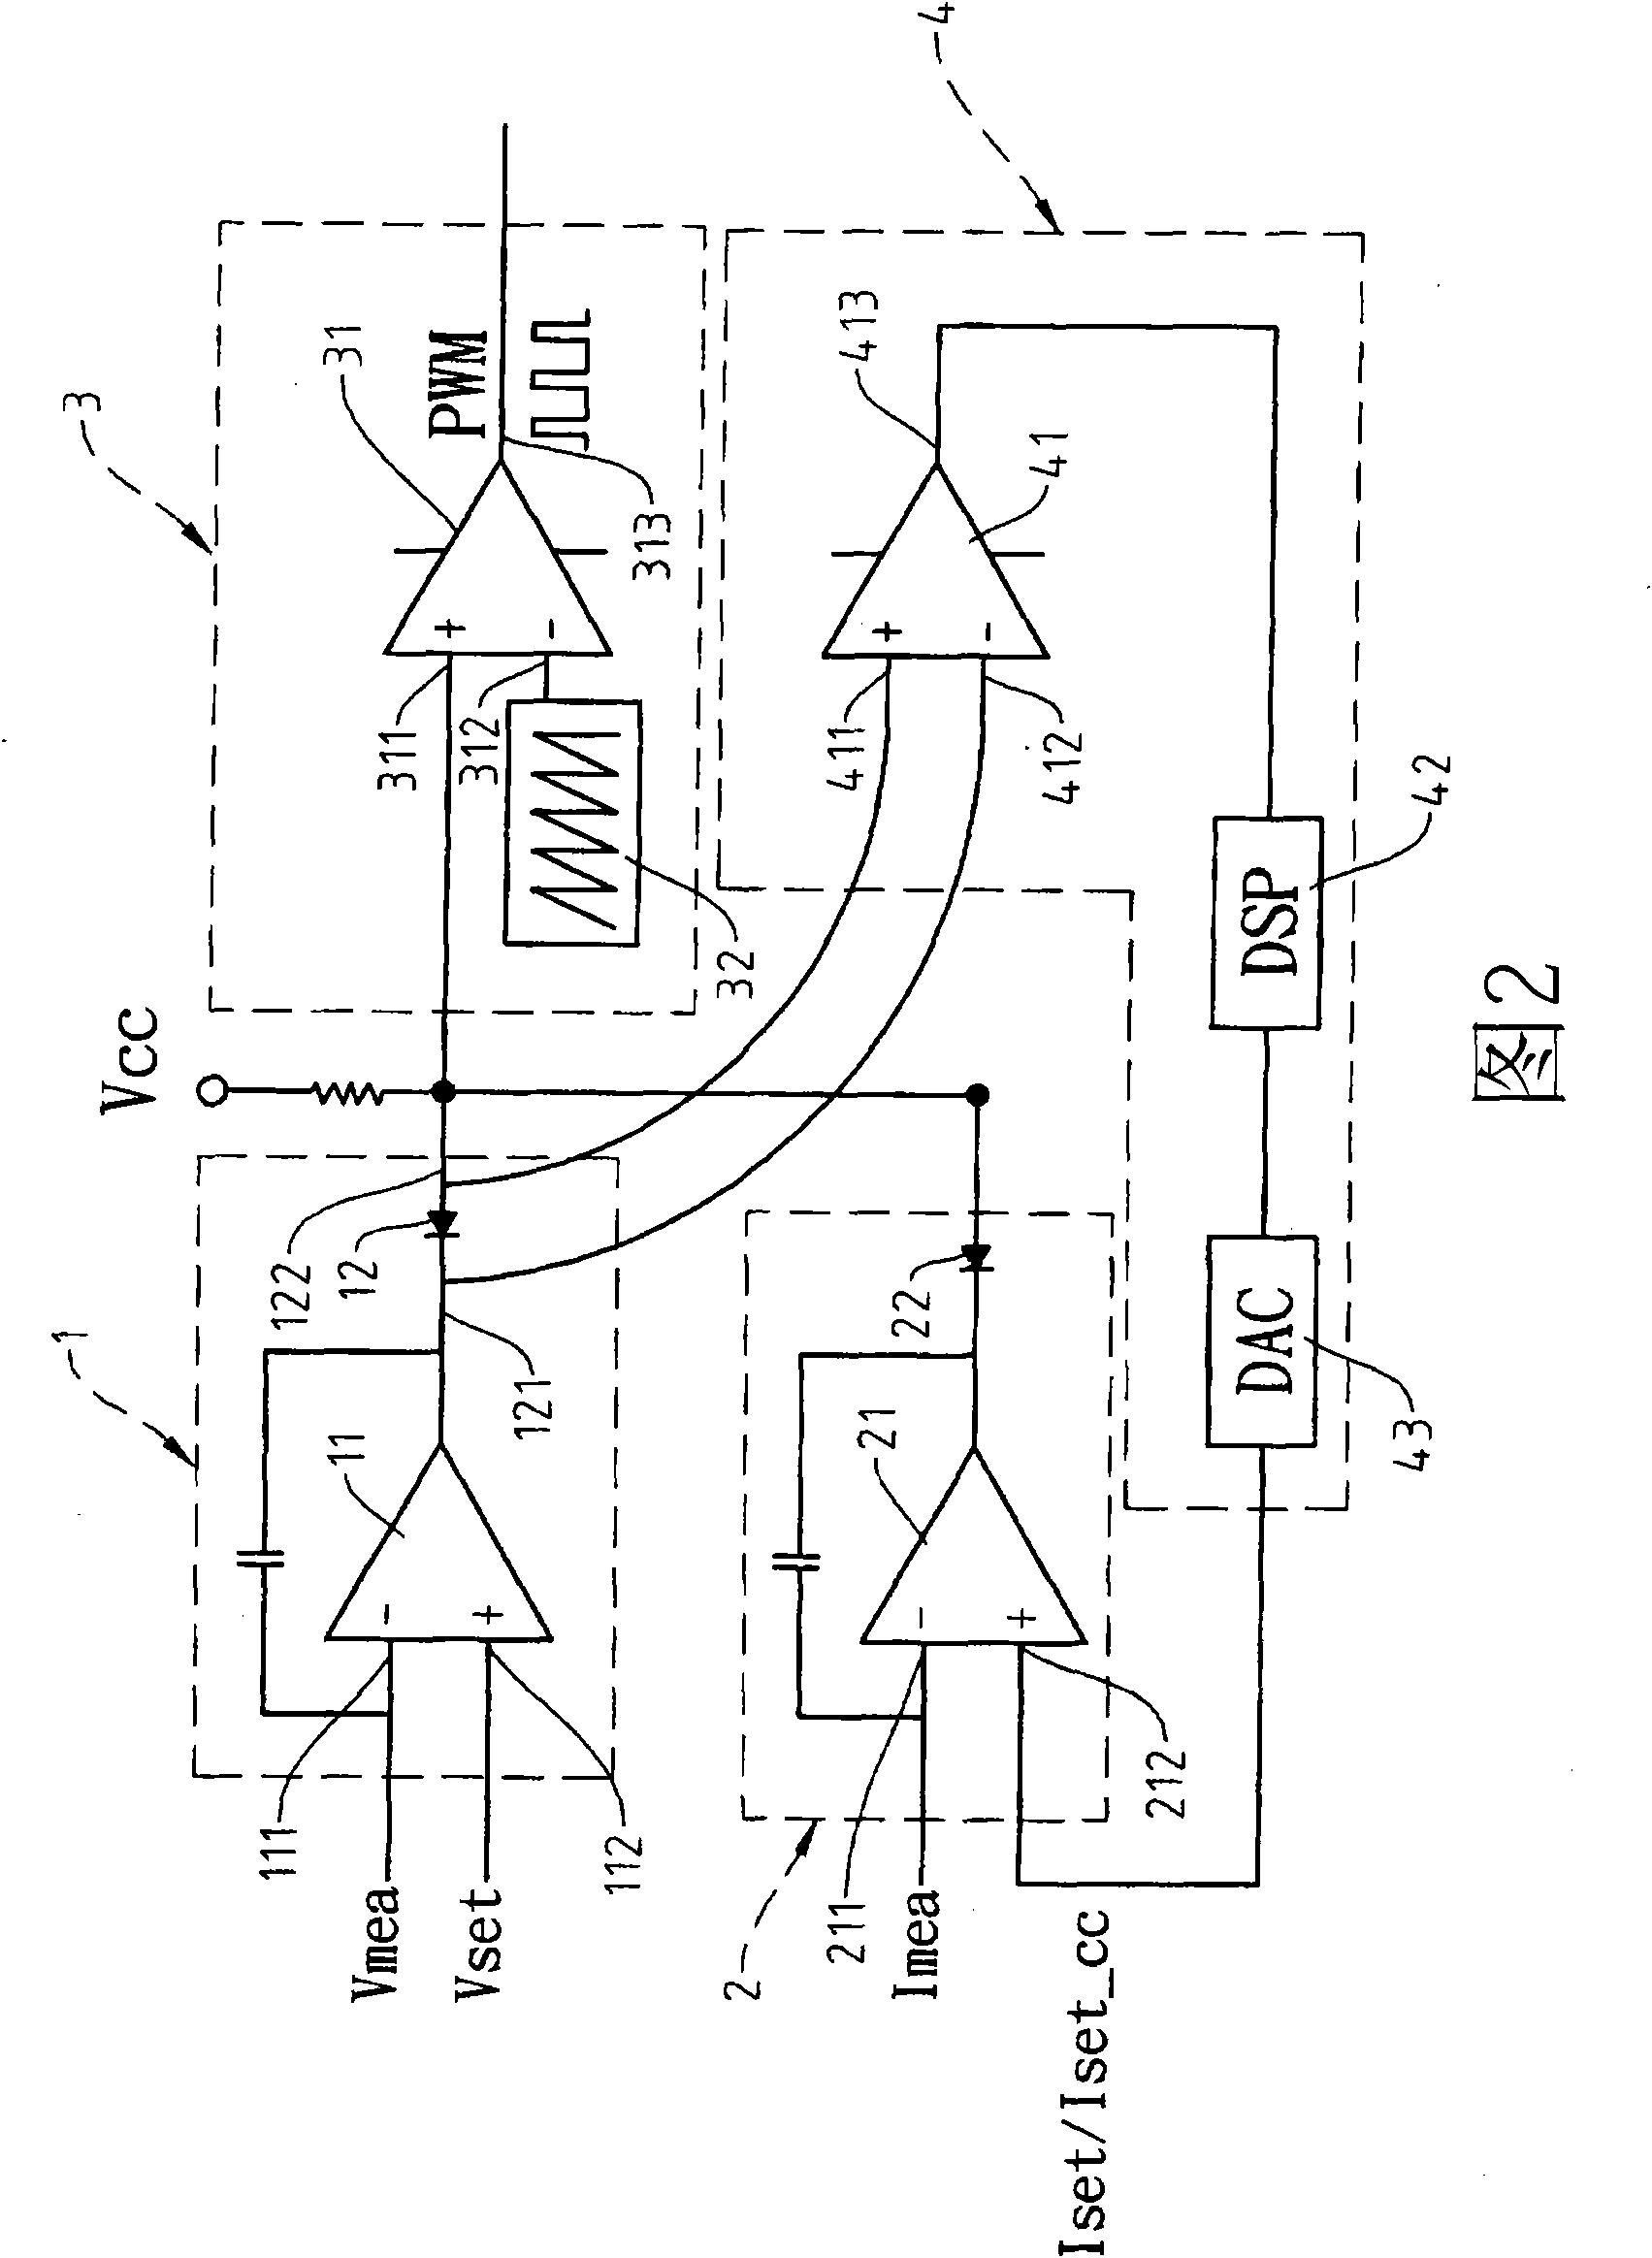 Current level change protection and control device for current supply